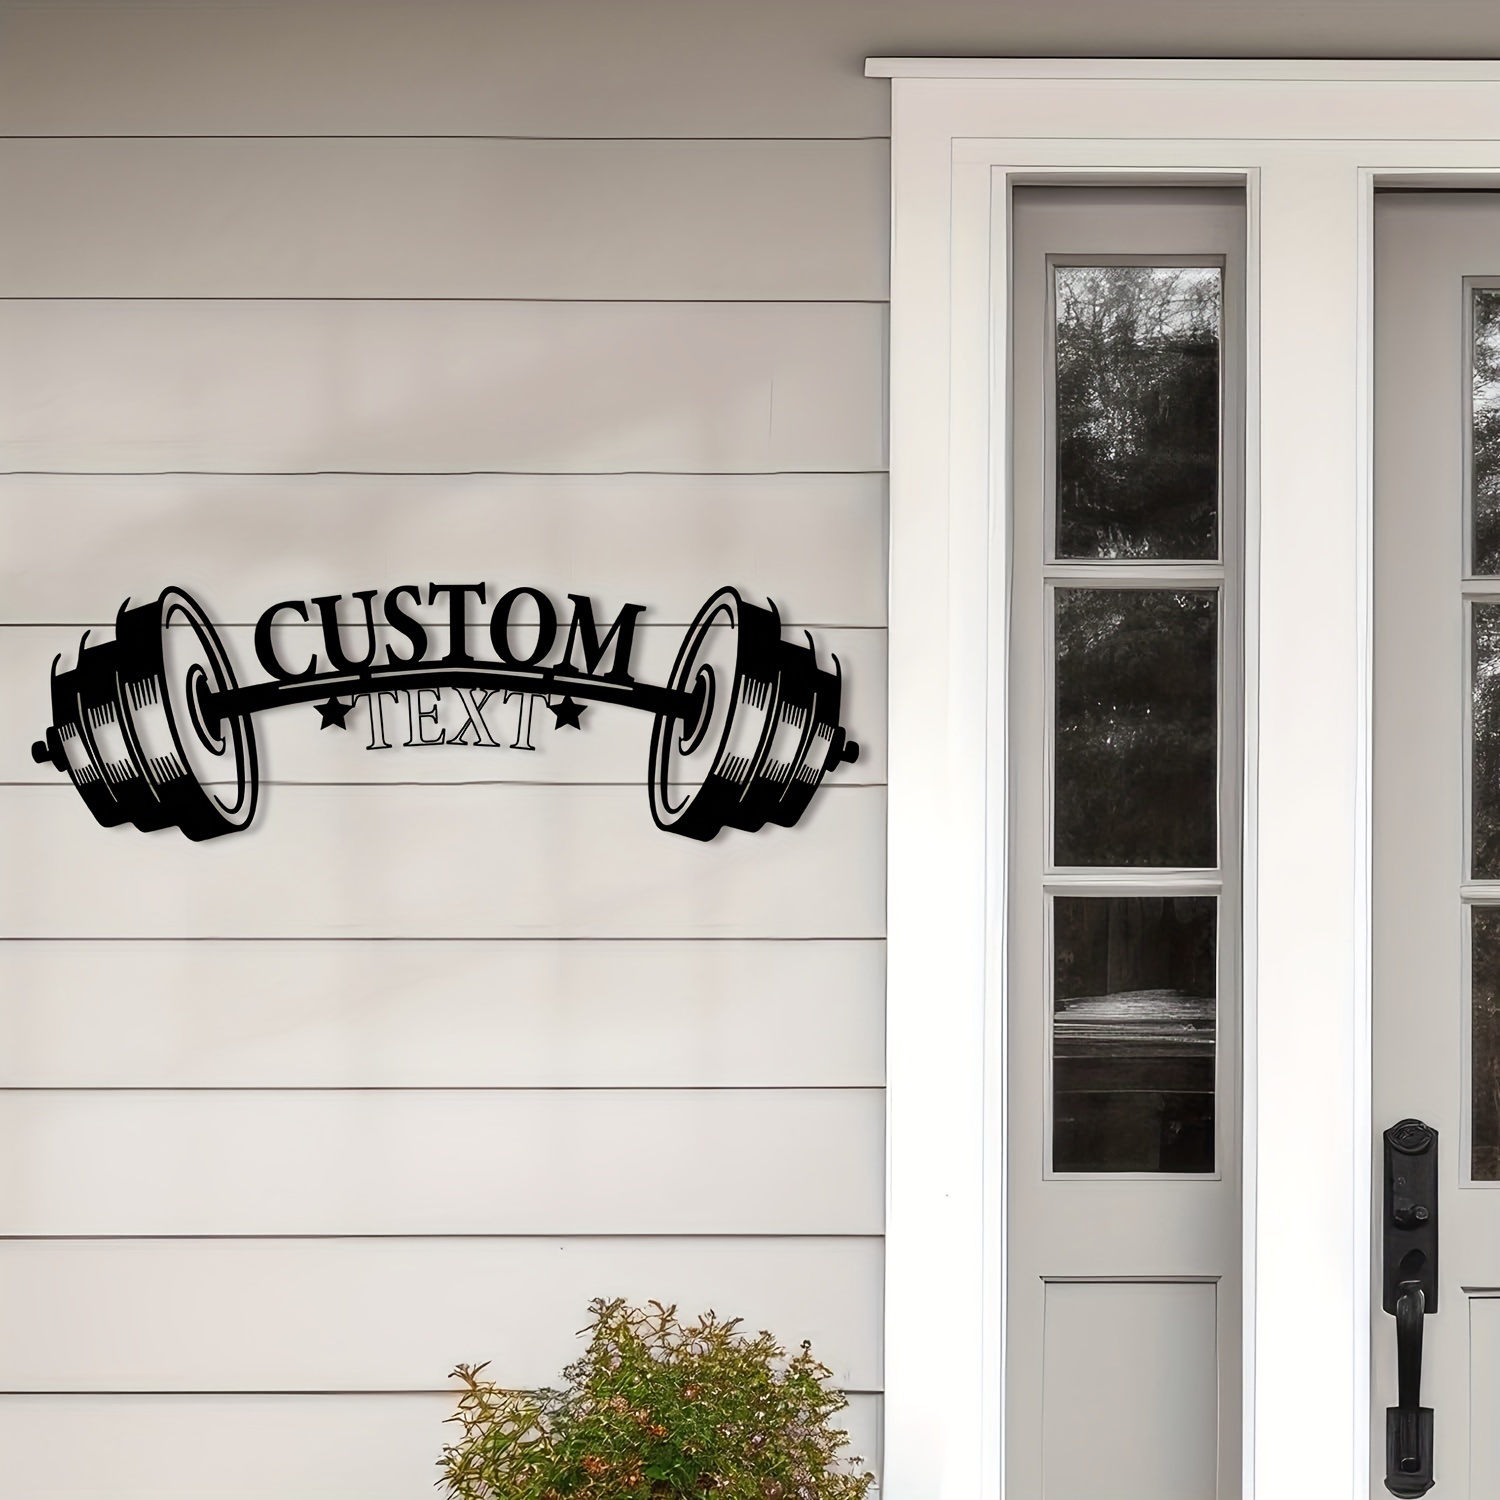 

1pc Personalized Text Gym Metal Sign, Custom Last Name Sign, Home Gym Sign, Fitness Training Wall Art Decor, Weightlifting Bodybuilding Sign For Dad's Gym, Workout Room